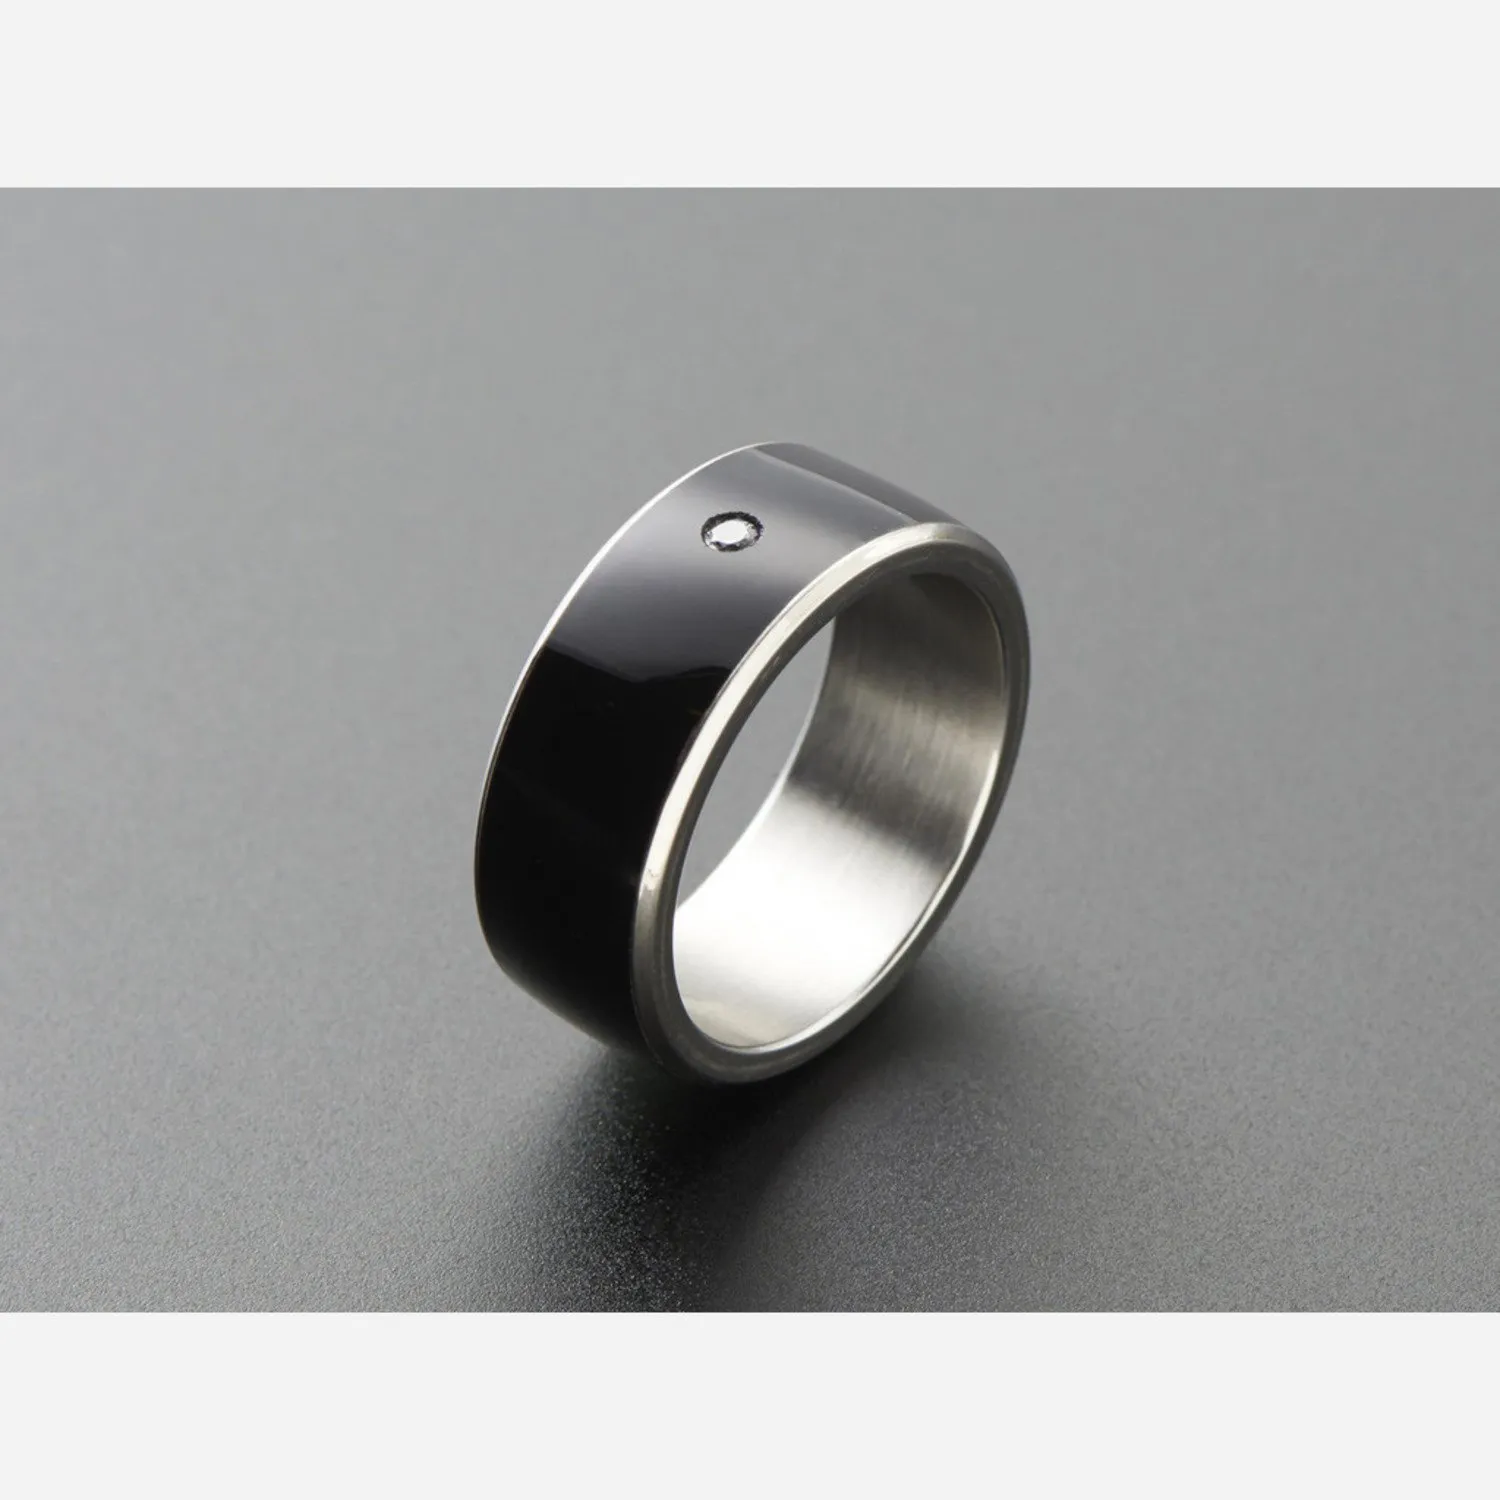 Photo of RFID / NFC Smart Ring - Size 9 - NTAG213